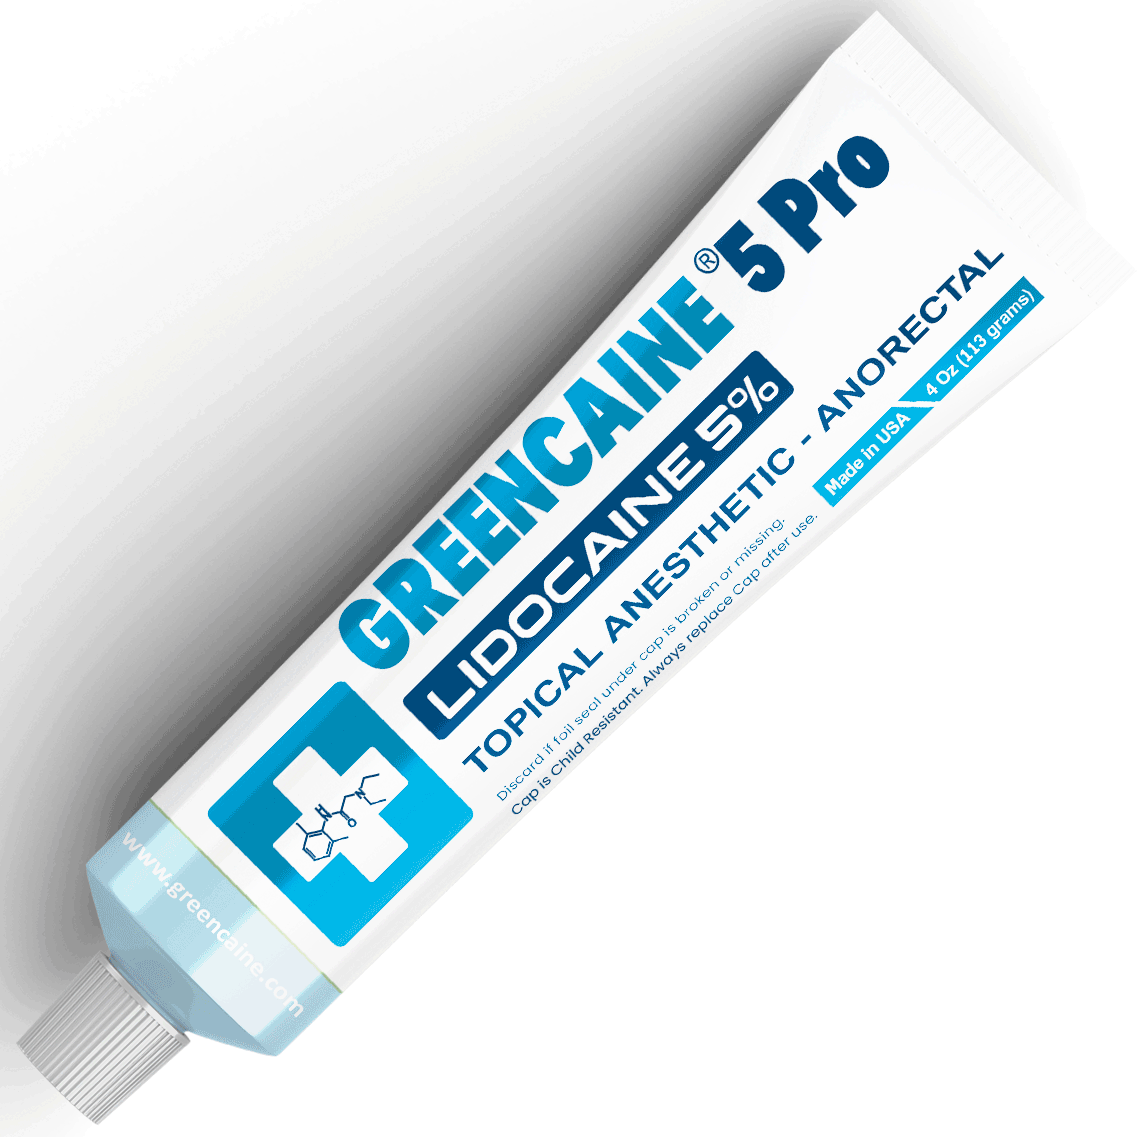 GREENCAINE 5 Pro, topical anesthetic lidocaine 5%, 4 Oz (113 grams) anorectal numbing cream